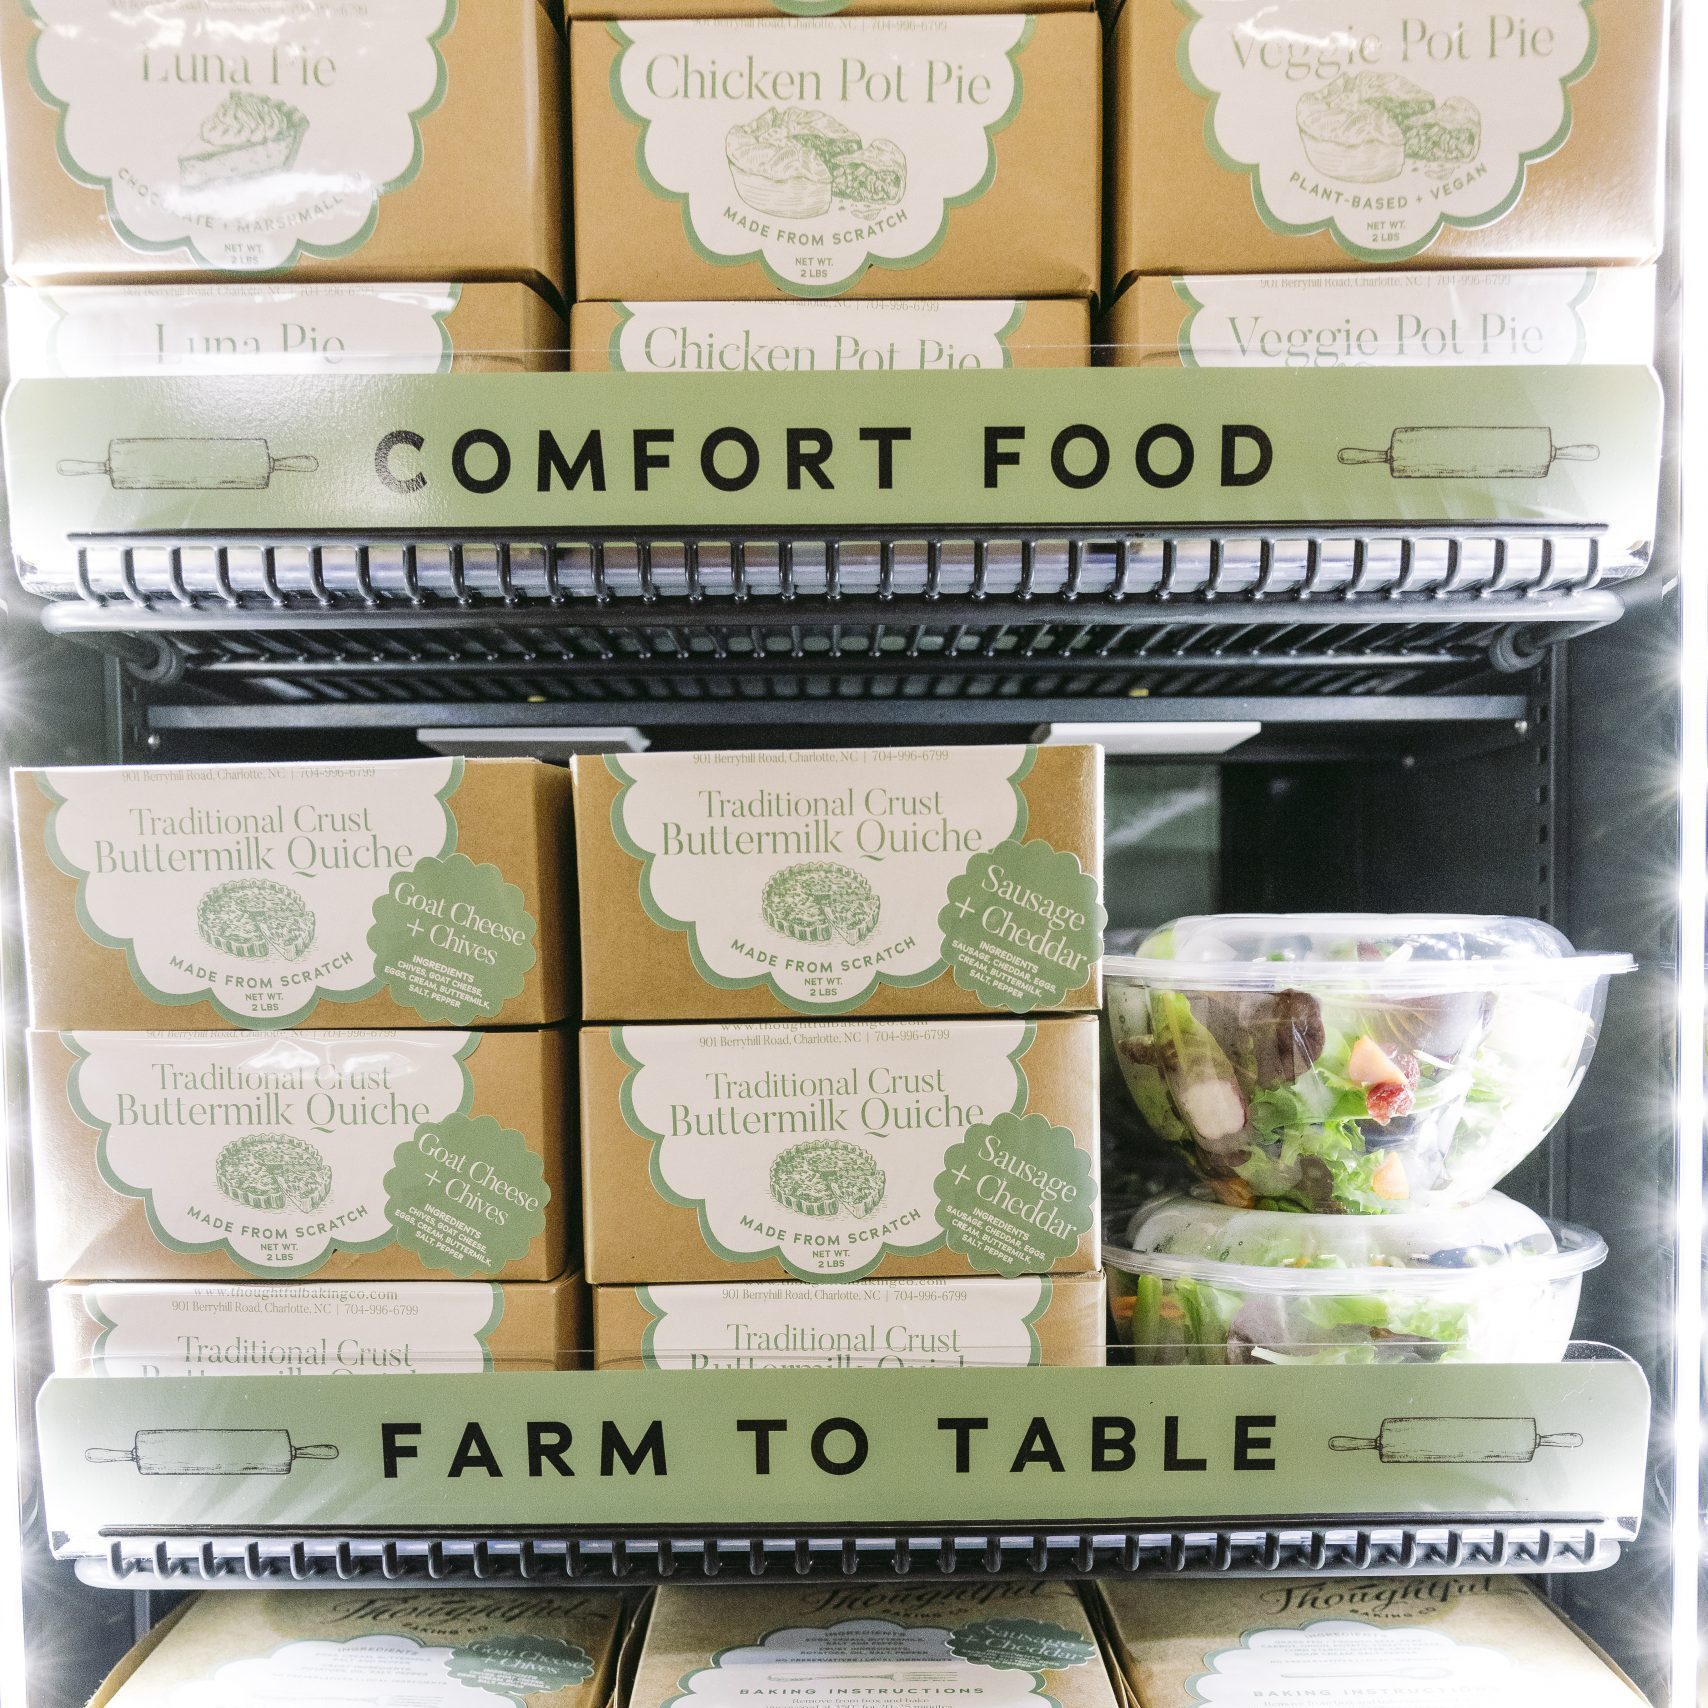 A fridge with grab-and-go meals from Thoughtful Baking Co.